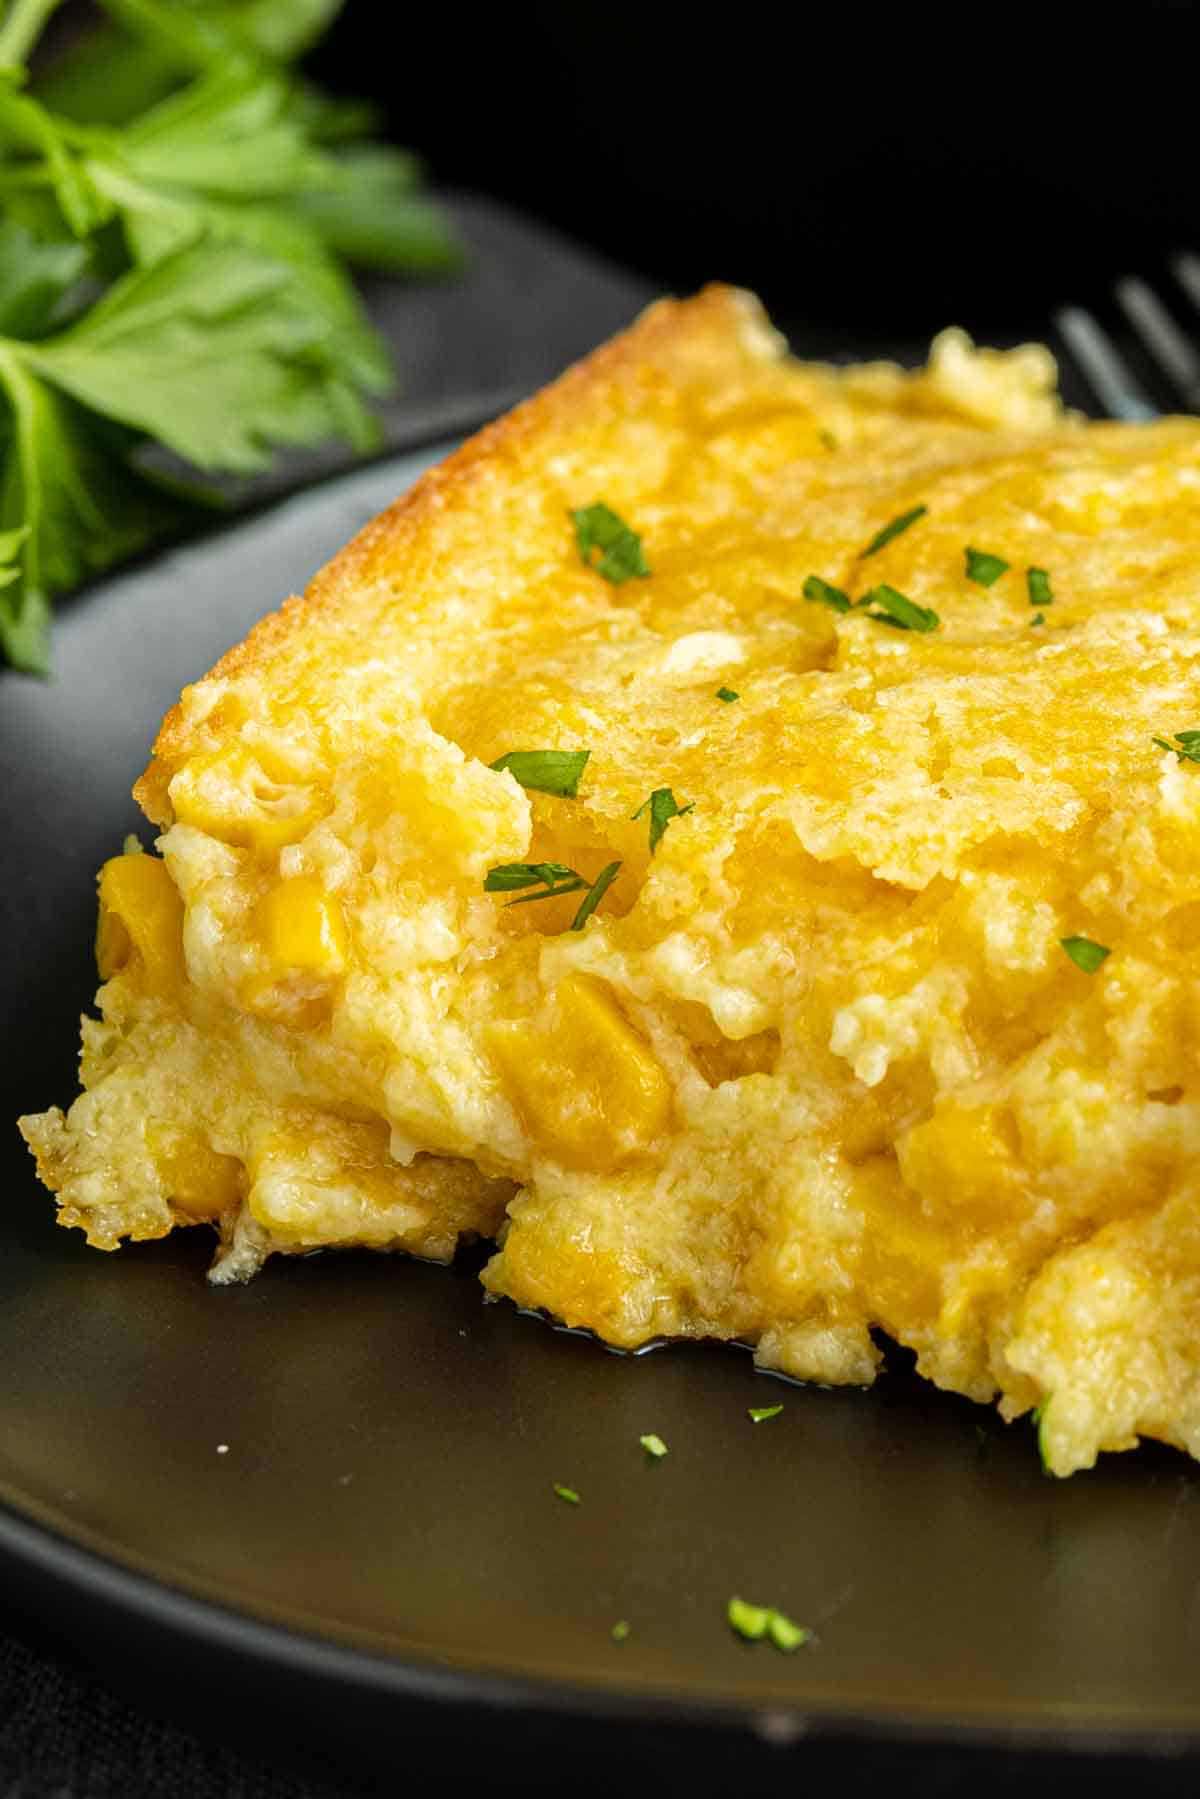 Creamed Corn Casserole on a black plate garnished with parsley